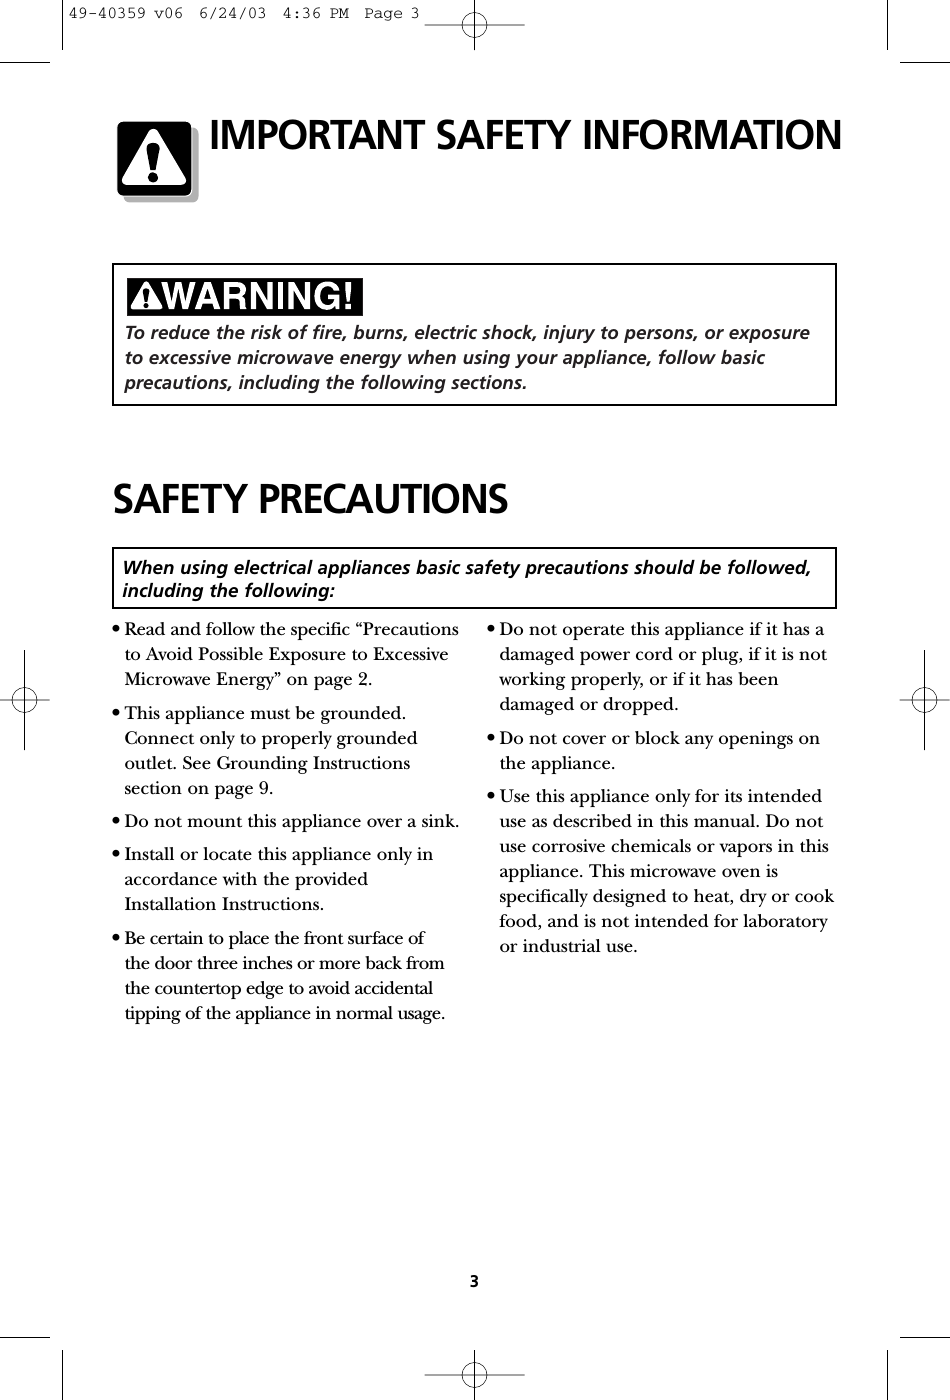 To reduce the risk of fire, burns, electric shock, injury to persons, or exposureto excessive microwave energy when using your appliance, follow basicprecautions, including the following sections.•Read and follow the specific “Precautionsto Avoid Possible Exposure to ExcessiveMicrowave Energy” on page 2.•This appliance must be grounded.Connect only to properly groundedoutlet. See Grounding Instructionssection on page 9.•Do not mount this appliance over a sink.•Install or locate this appliance only inaccordance with the providedInstallation Instructions.•Be certain to place the front surface of the door three inches or more back from the countertop edge to avoid accidentaltipping of the appliance in normal usage.•Do not operate this appliance if it has adamaged power cord or plug, if it is notworking properly, or if it has beendamaged or dropped.•Do not cover or block any openings onthe appliance.•Use this appliance only for its intendeduse as described in this manual. Do notuse corrosive chemicals or vapors in thisappliance. This microwave oven isspecifically designed to heat, dry or cookfood, and is not intended for laboratoryor industrial use.SAFETY PRECAUTIONS3When using electrical appliances basic safety precautions should be followed,including the following:IMPORTANT SAFETY INFORMATION49-40359 v06  6/24/03  4:36 PM  Page 3